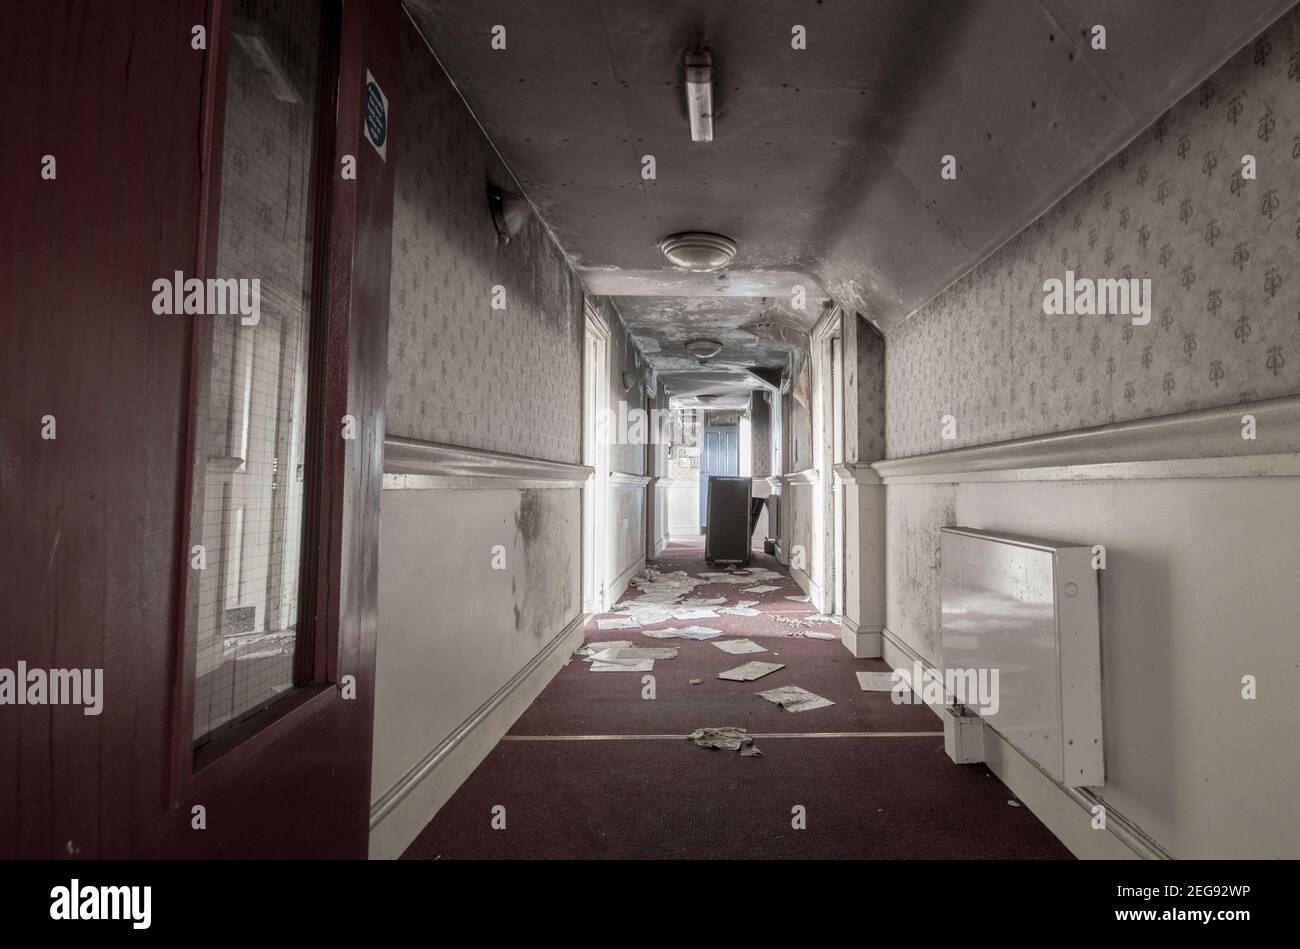 UK: Urban explorer Luke Anon was dismayed by the shocking state of the home. TROUBLING photos from inside one of Britain?s grimmest care homes - where Stock Photo